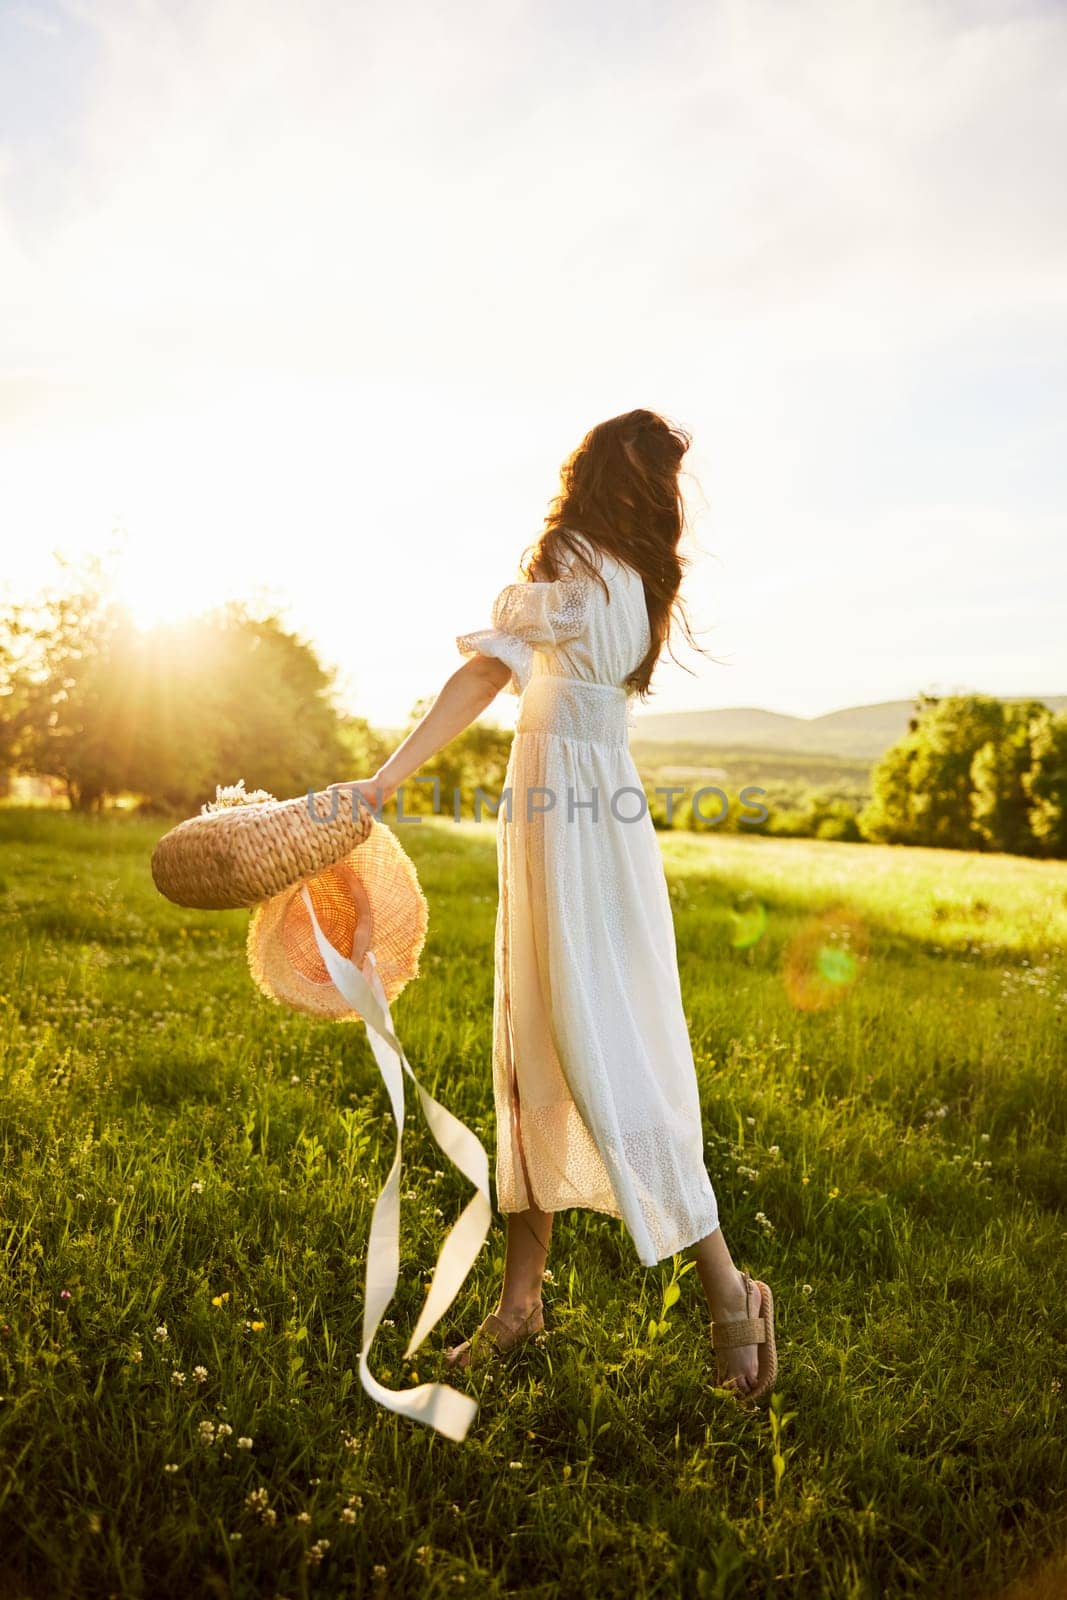 a woman in a light dress in a chamomile field against the background of a sunset stands with her back to the camera with a basket of flowers in her hands by Vichizh